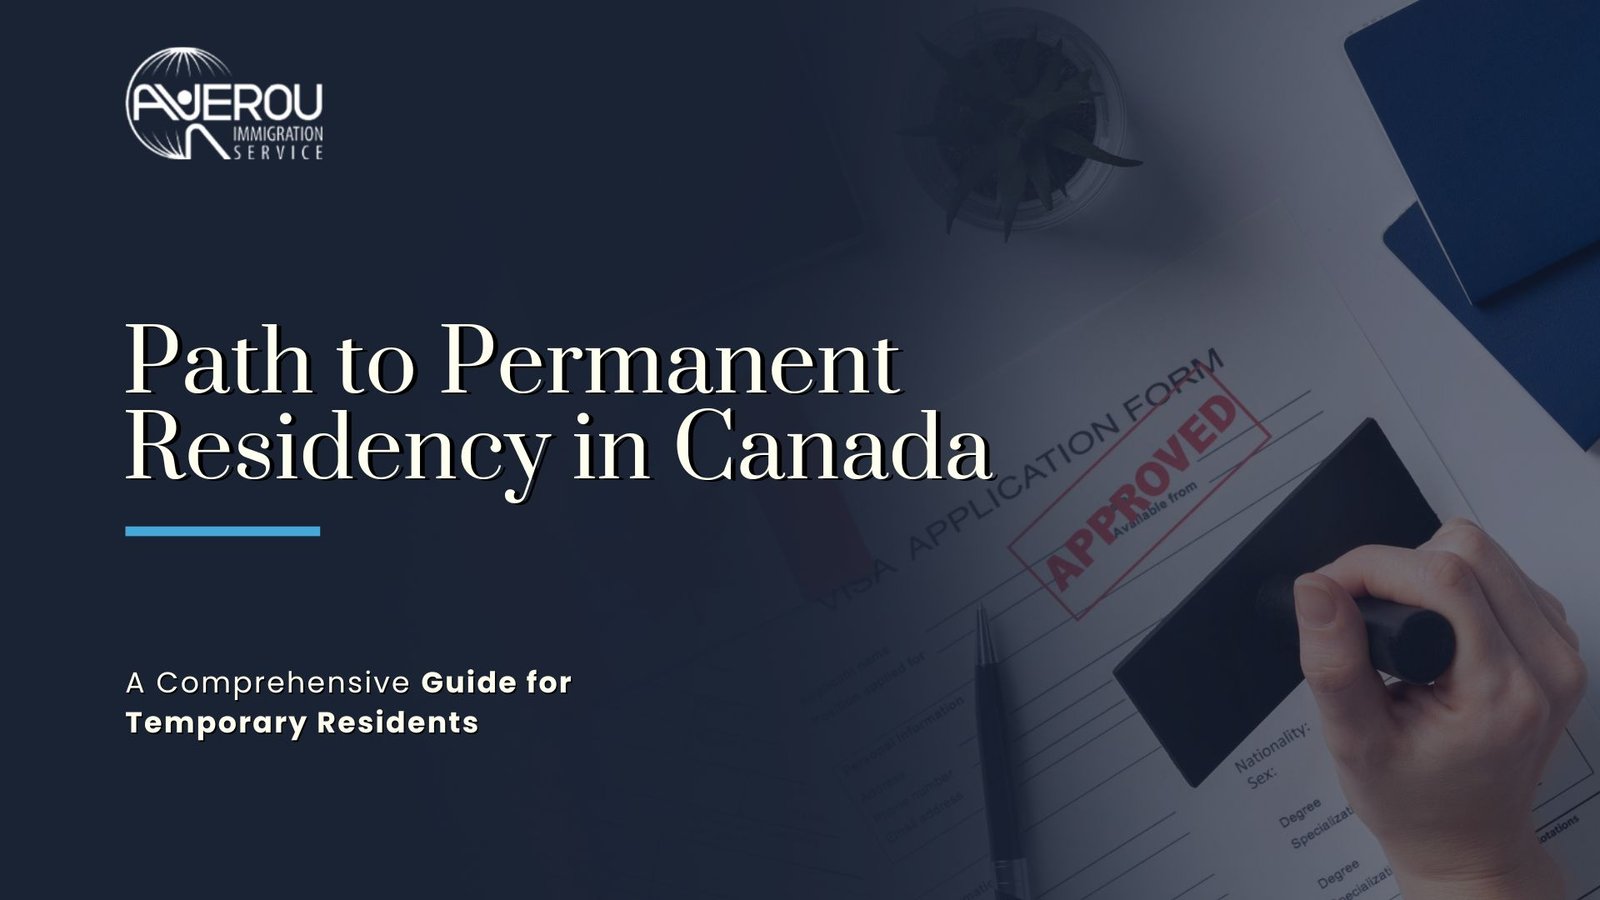 Path to Permanent Residency in Canada: A Comprehensive Guide for Temporary Residents